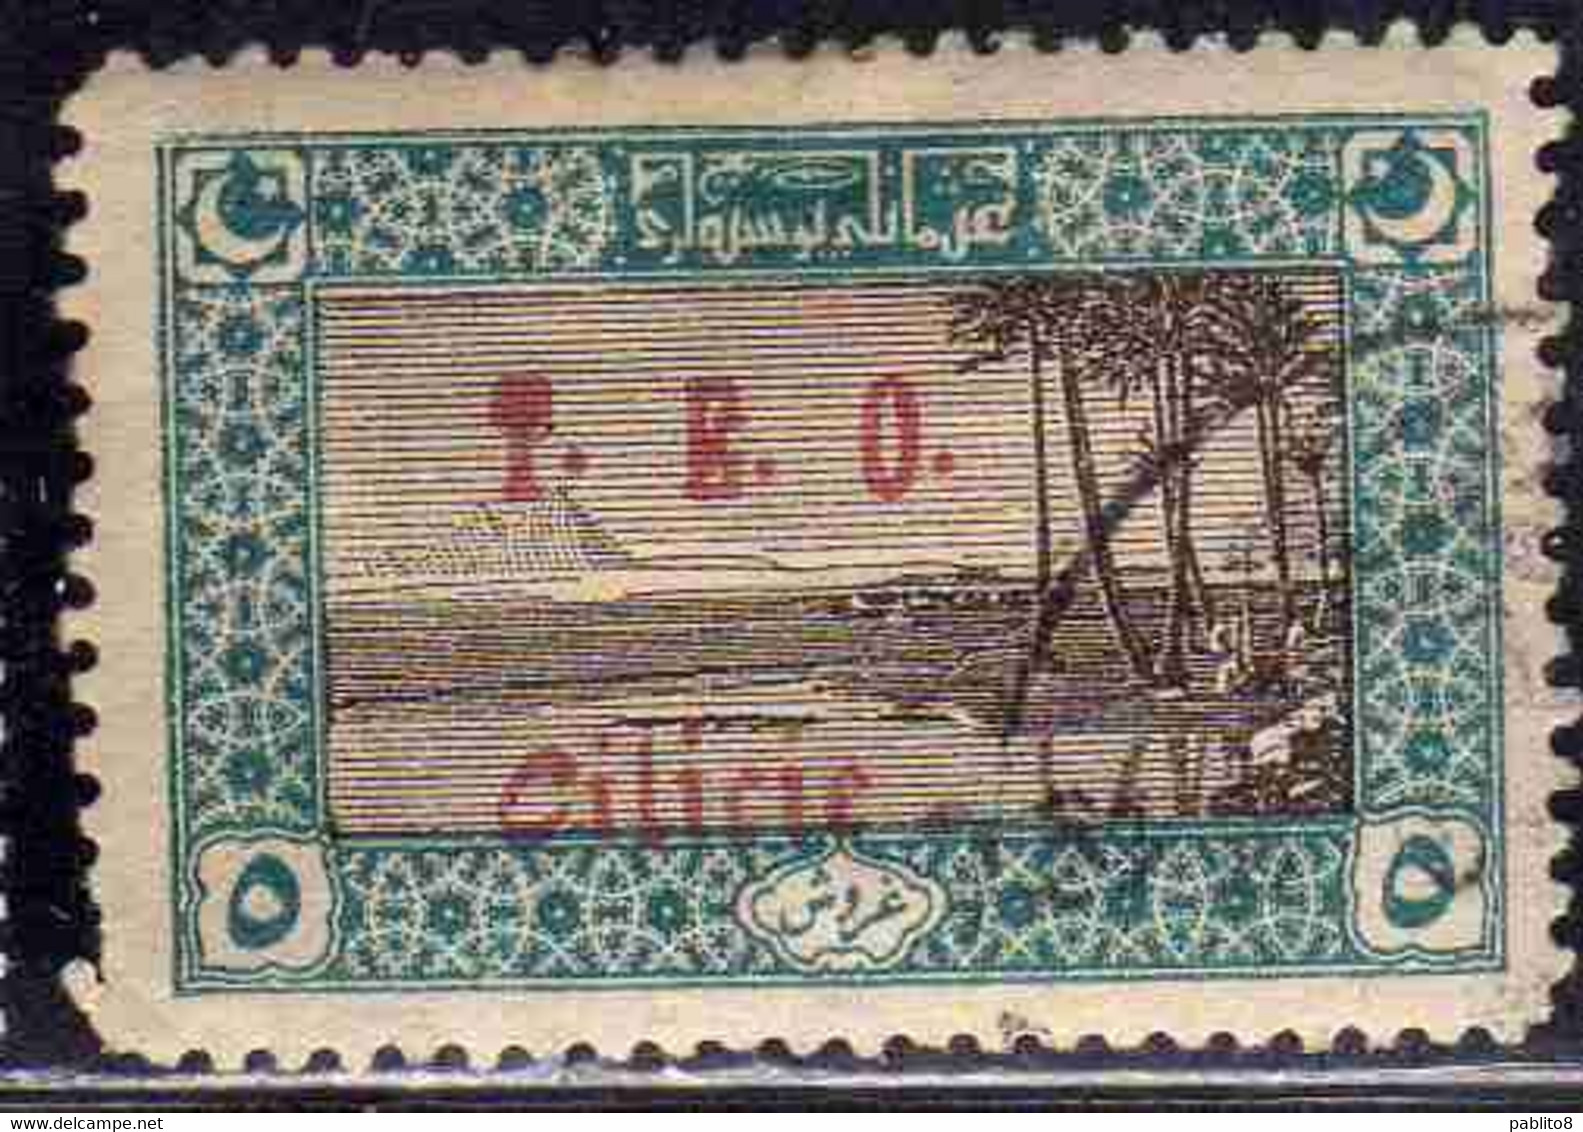 FRENCH CILICIE CILICIA FRANCAISE 1919 T.E.O. PYRAMIDS OF EGYPT 5pi USED USATO OBLITERE' - Used Stamps